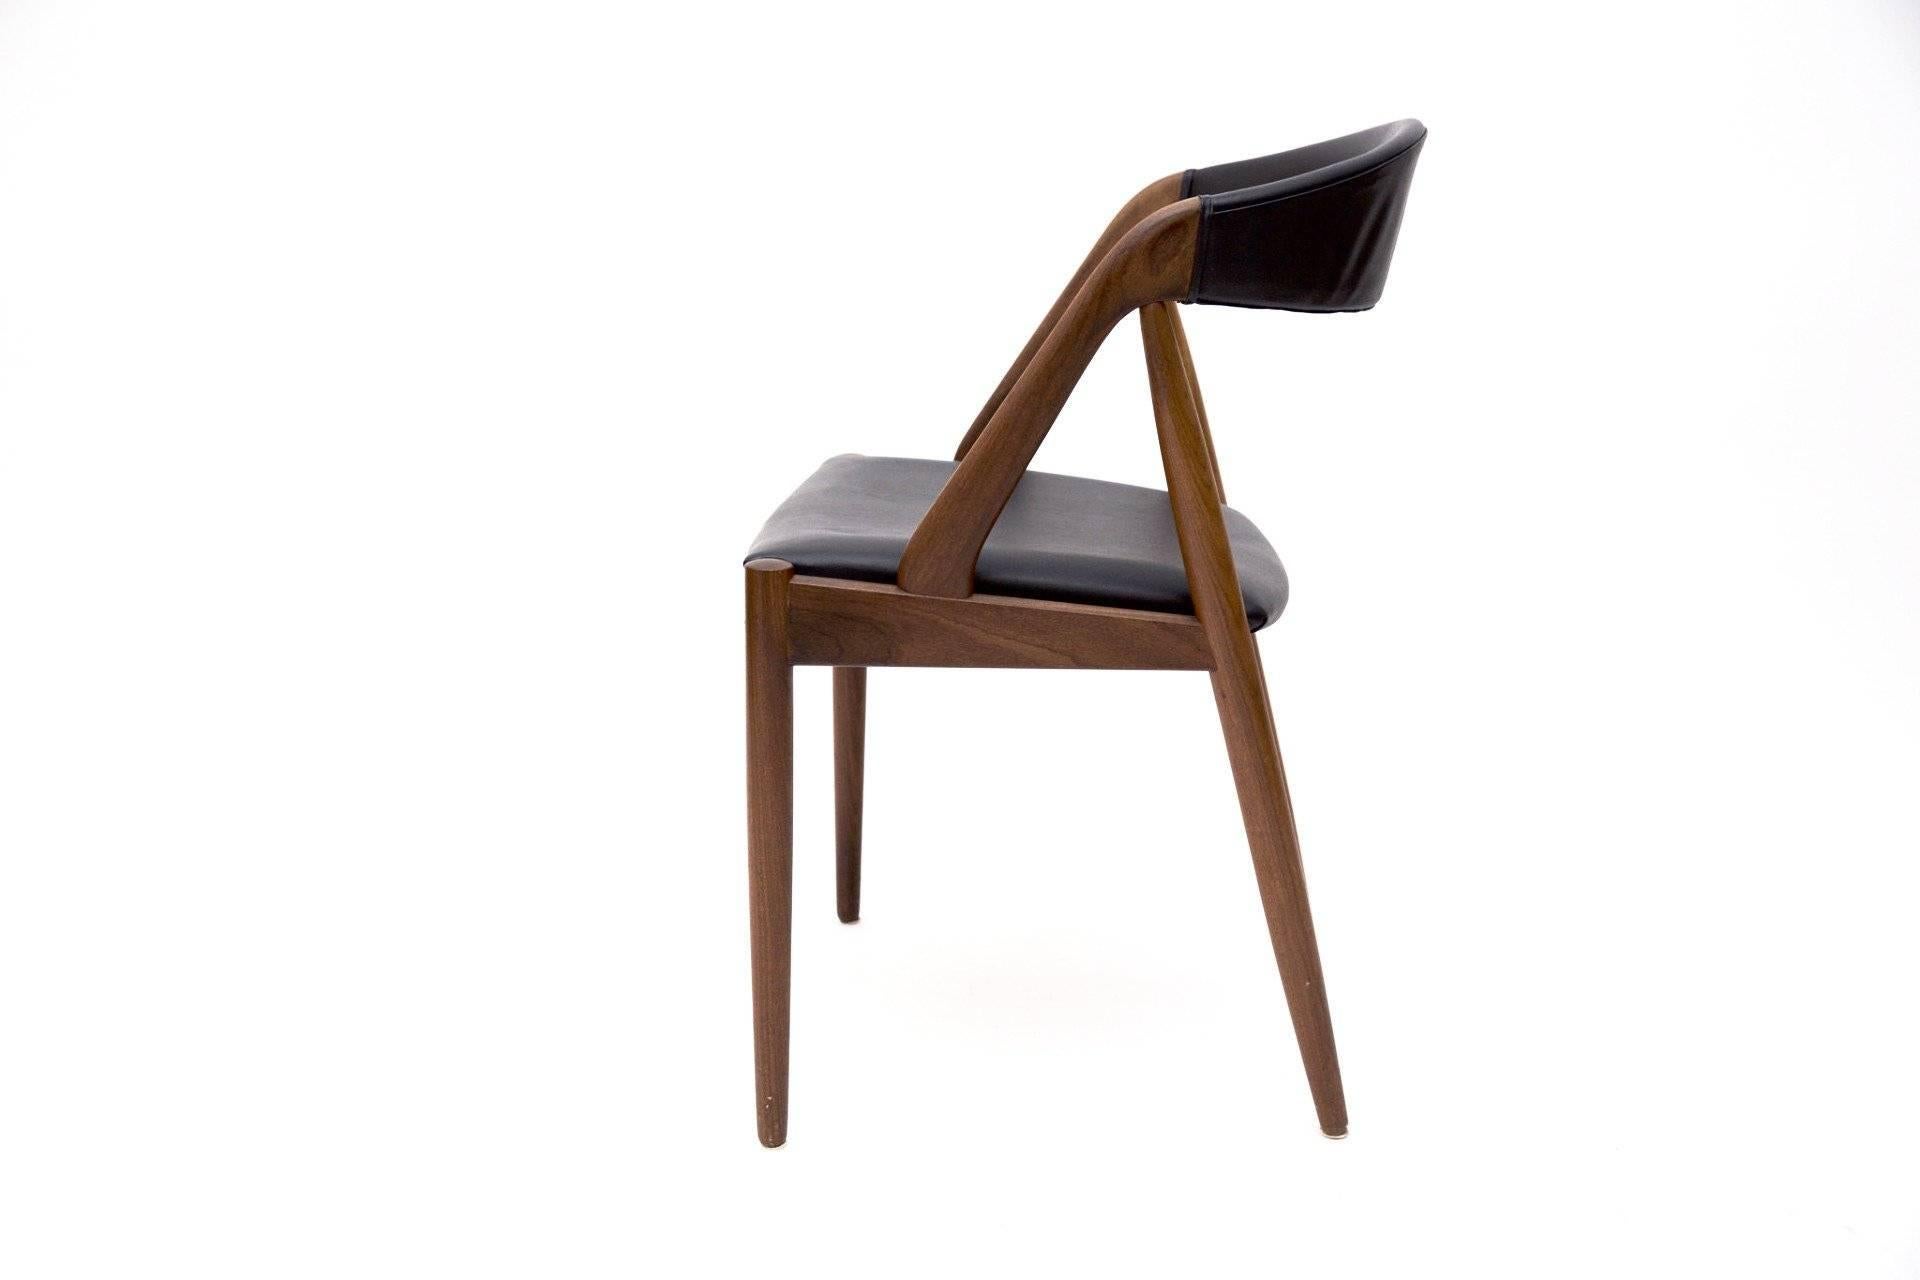 Four classic chairs by Kai Kristiansen. The unique model 31 is a beautiful chair with deep curved backrest that provides great comfort. The frame is made of a beautiful teak and the seat and backrest are covered in black skai. 

Kai Kristiansen